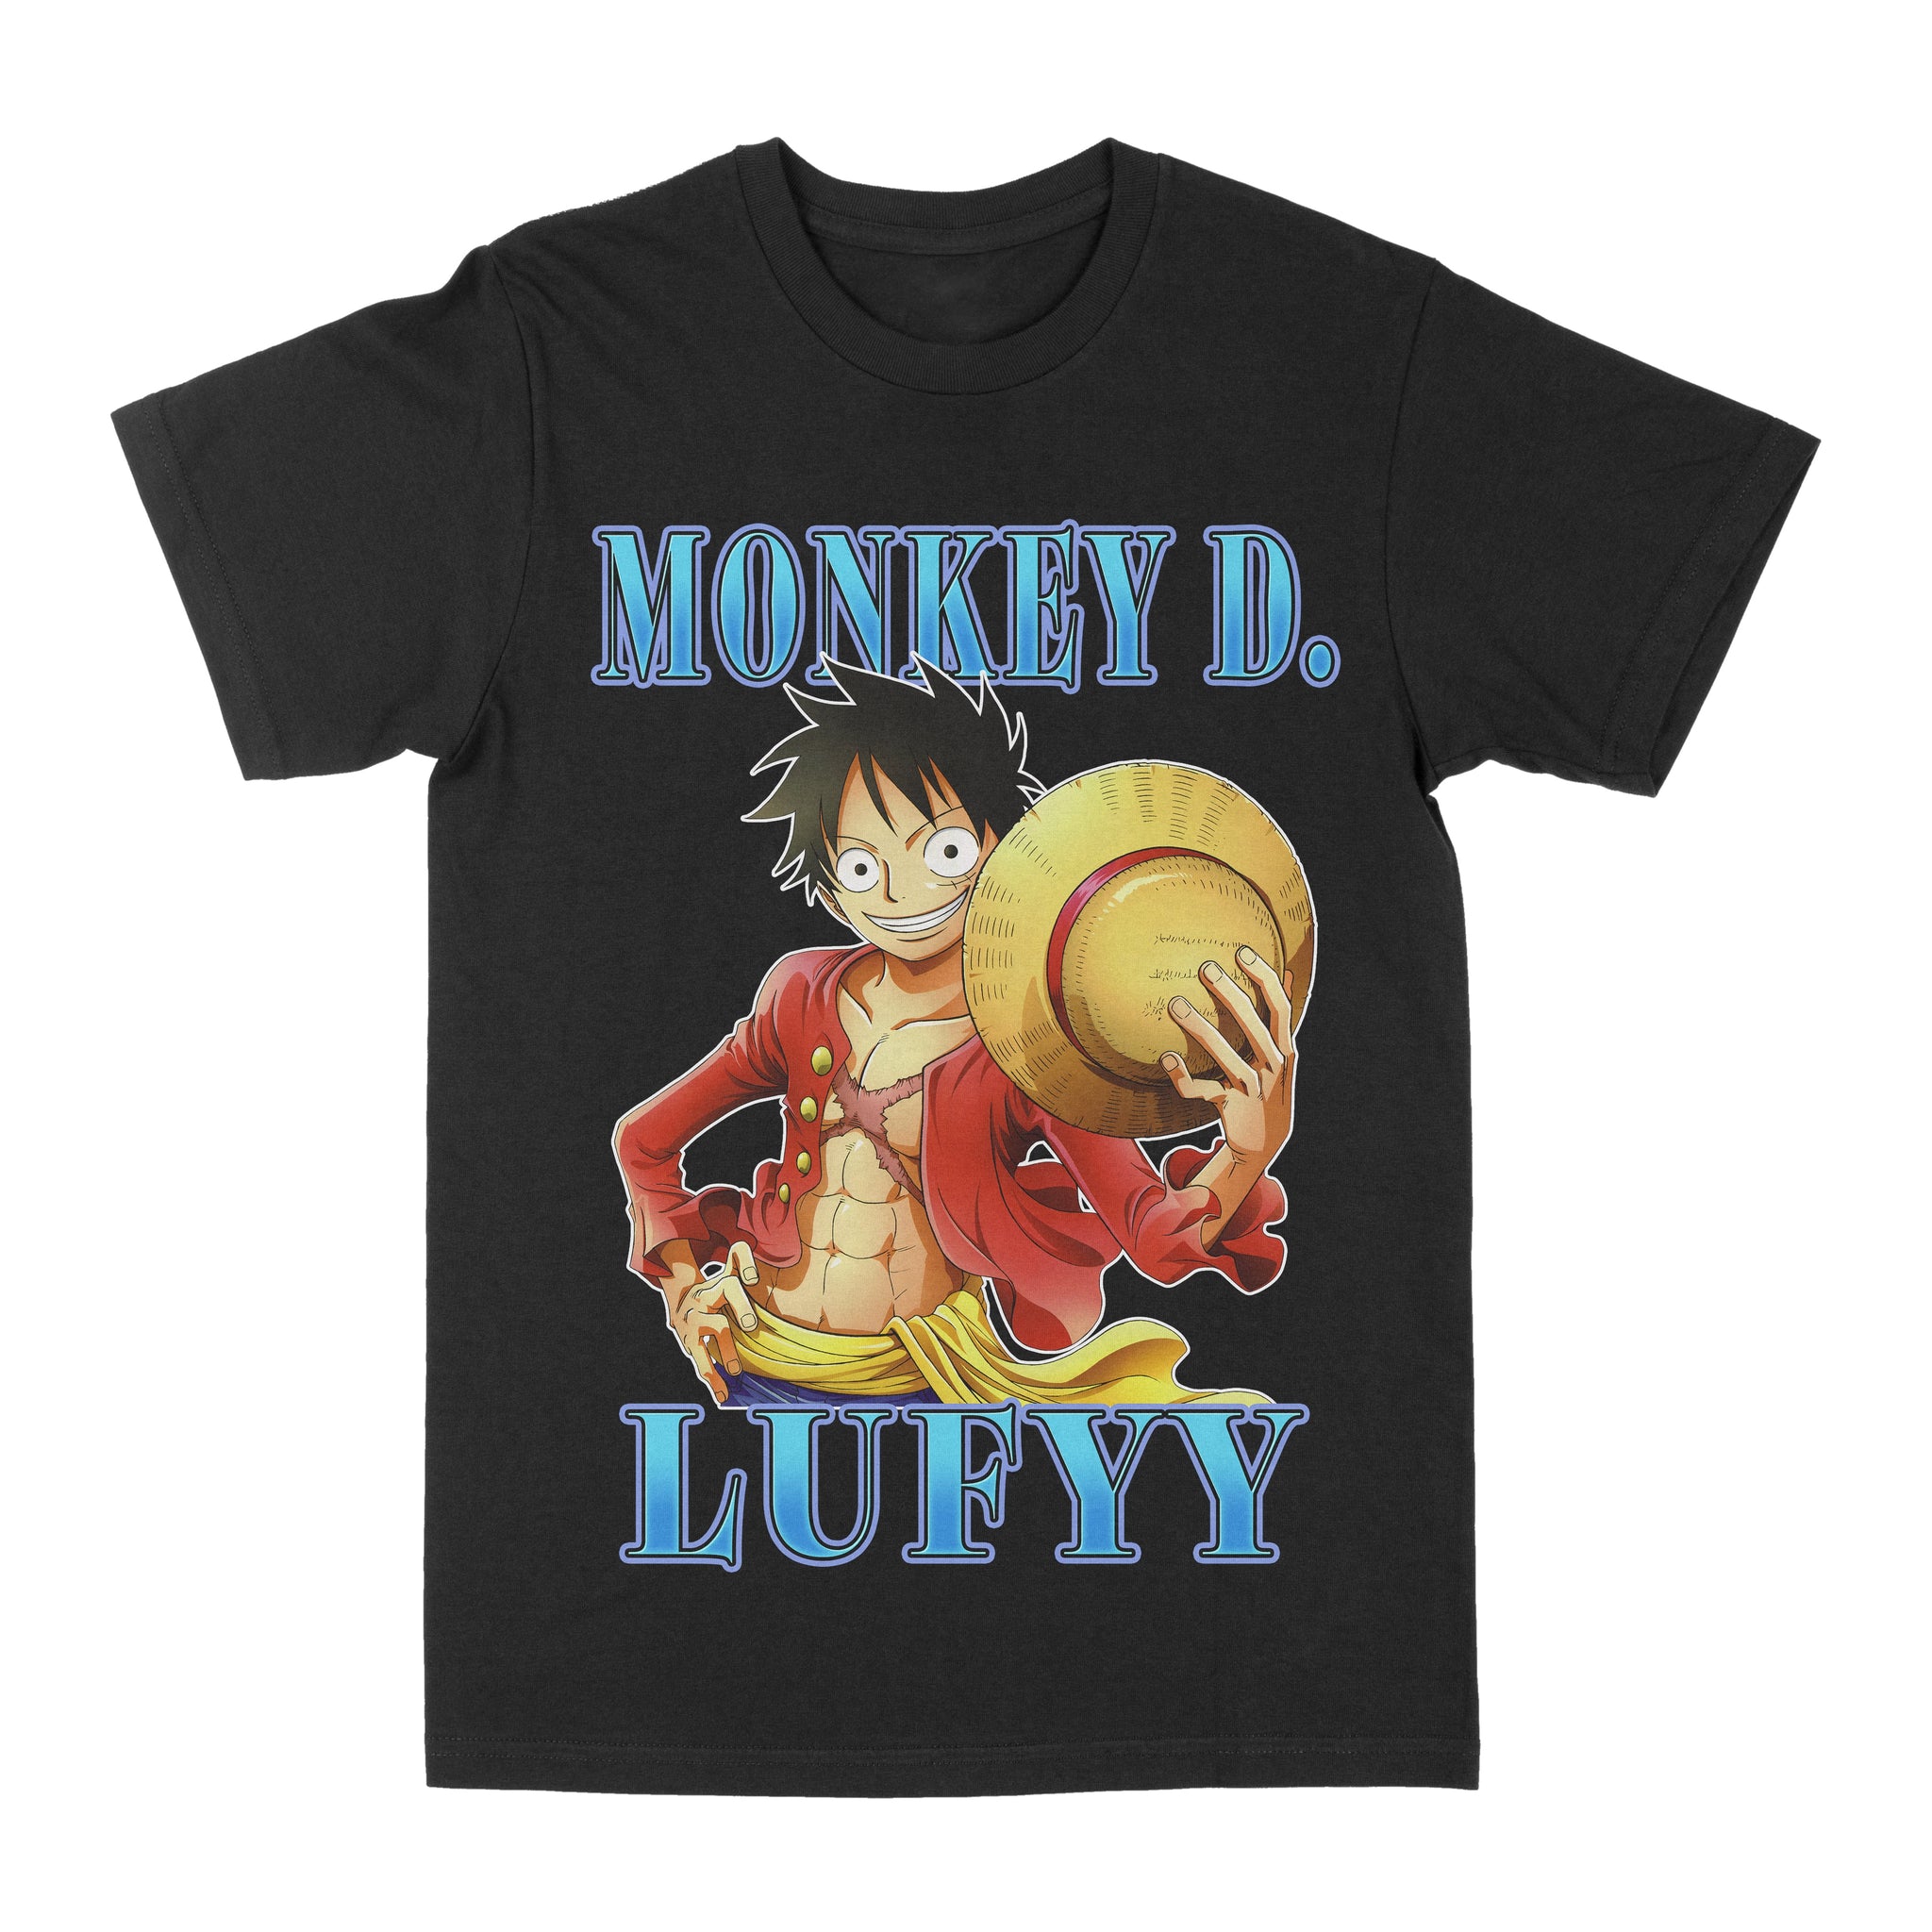 Monkey D. Luffy Graphic Tee